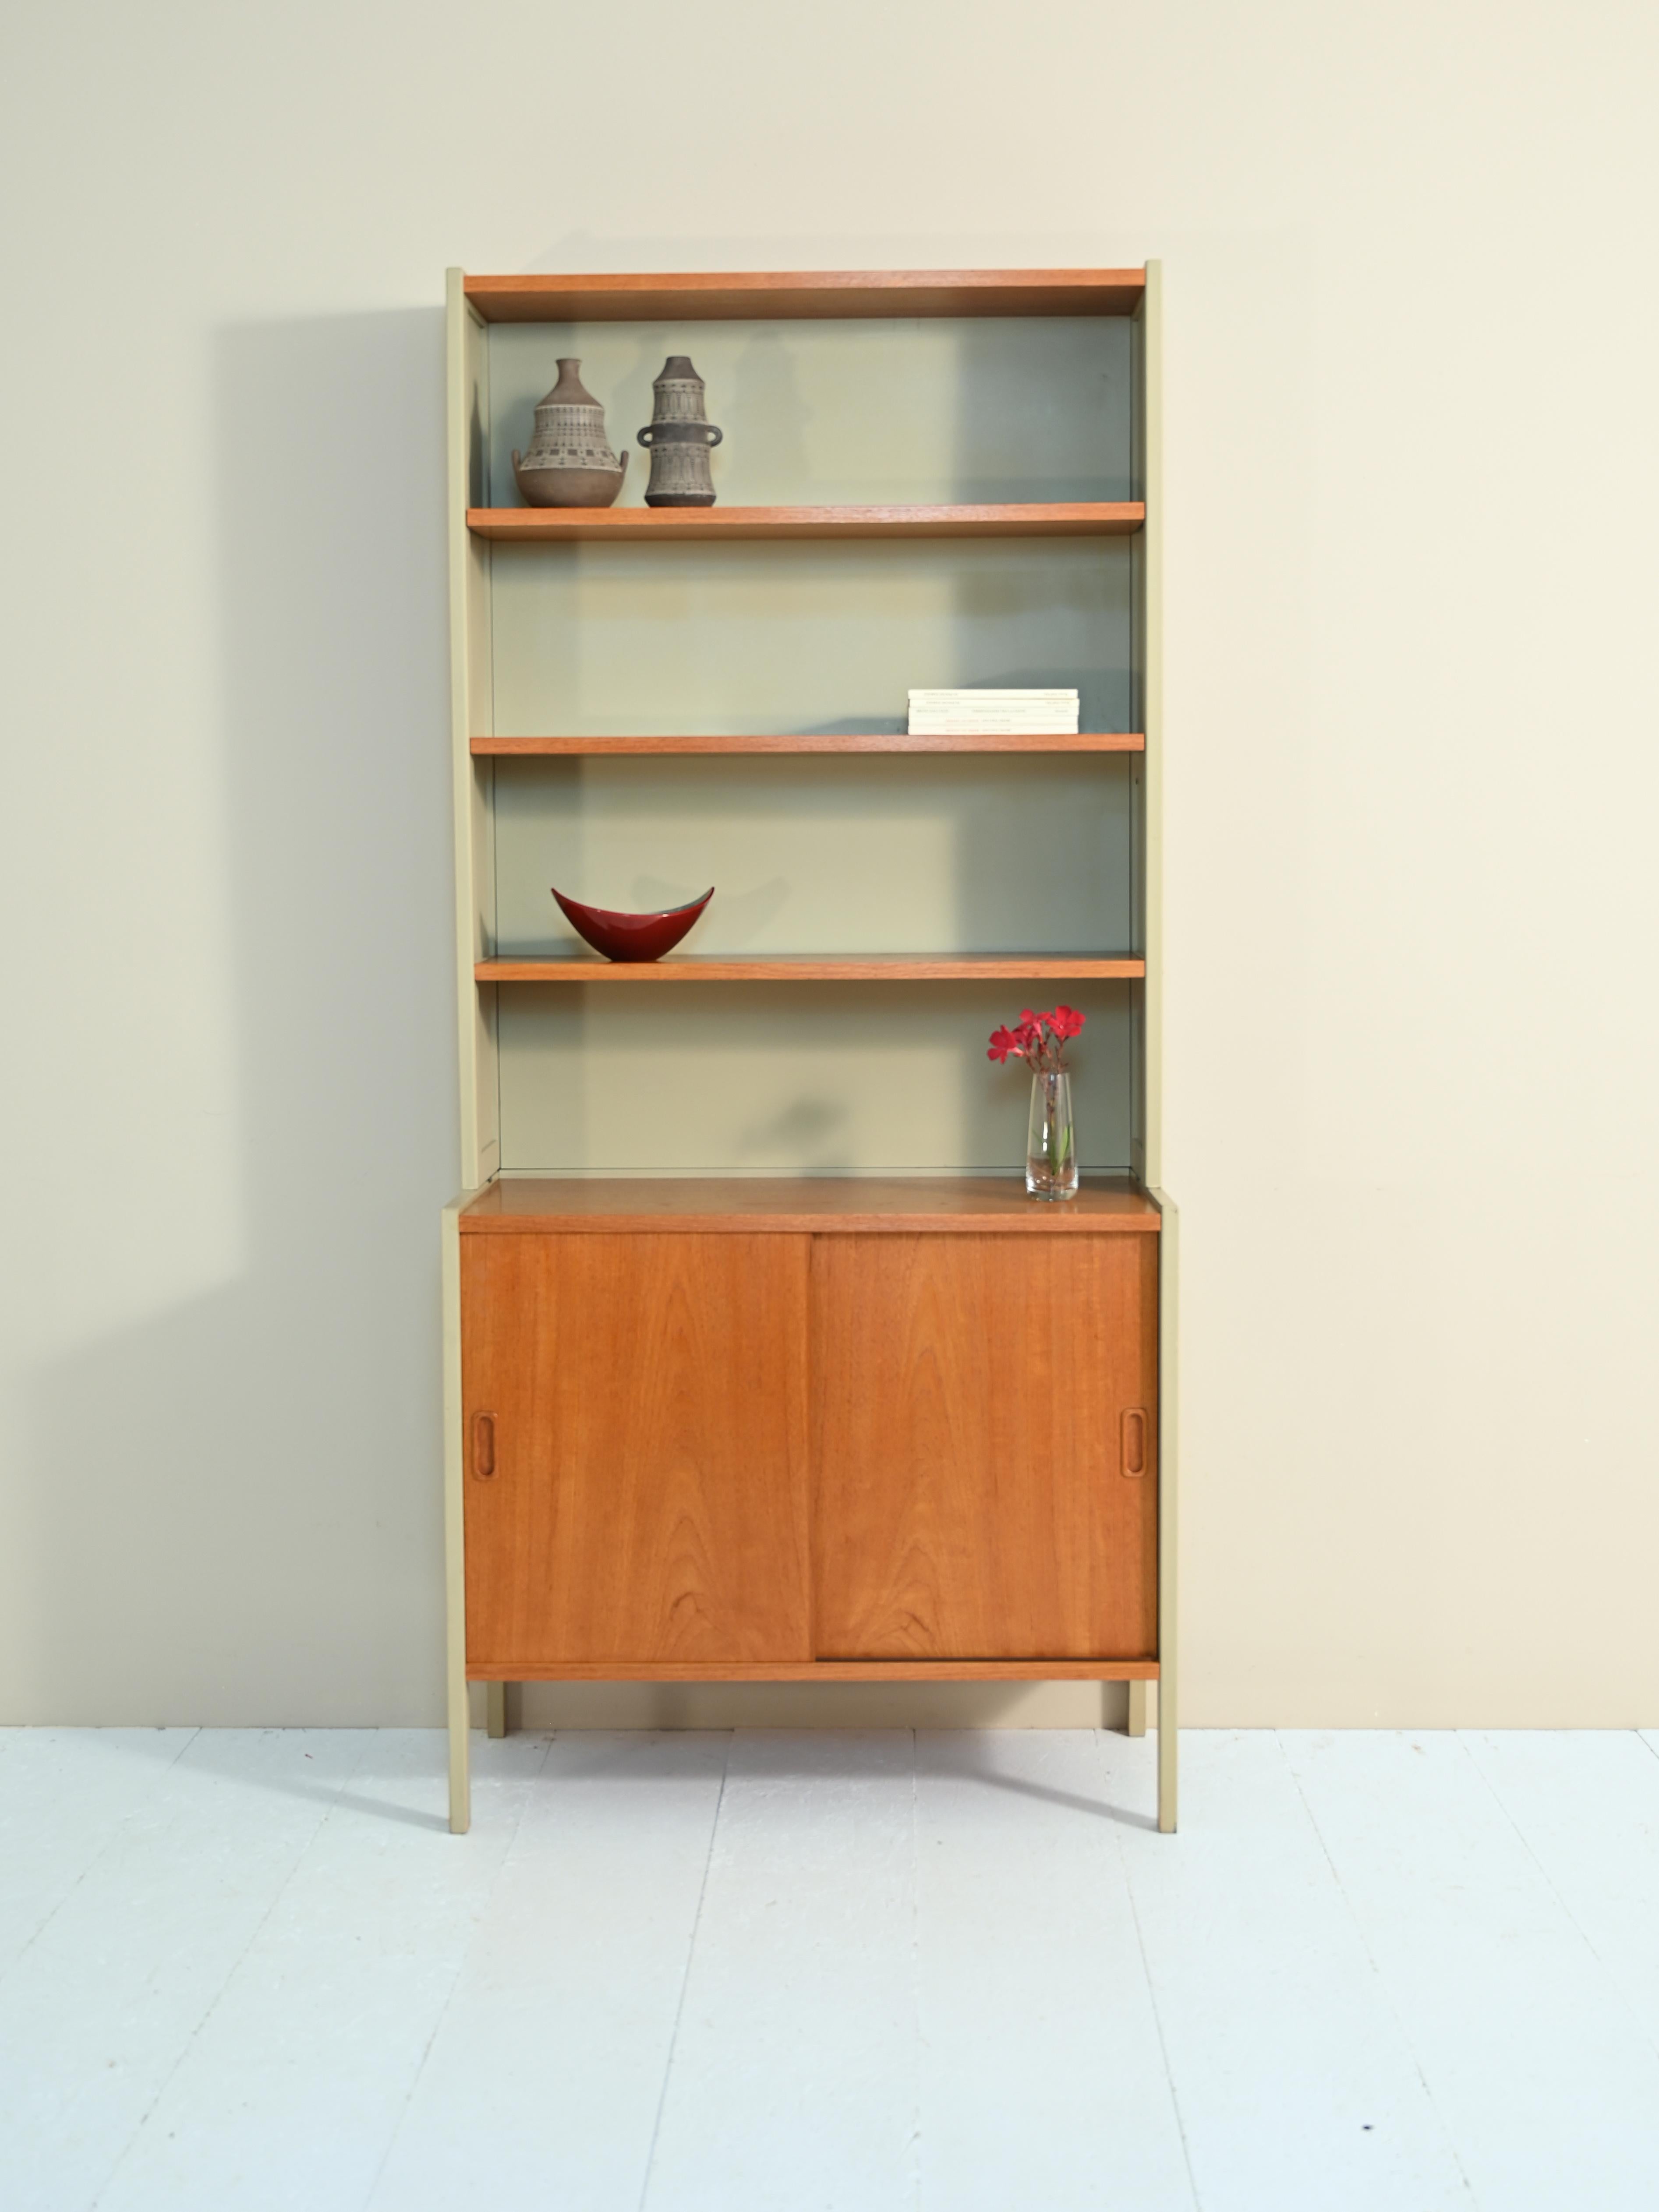 Bookcase with shelving and sideboard, original vintage 1960s.

Original vintage cabinet of Scandinavian origin, consisting of two parts. 
The upper part is a bookcase equipped with adjustable height shelving, the lower part is a cabinet equipped